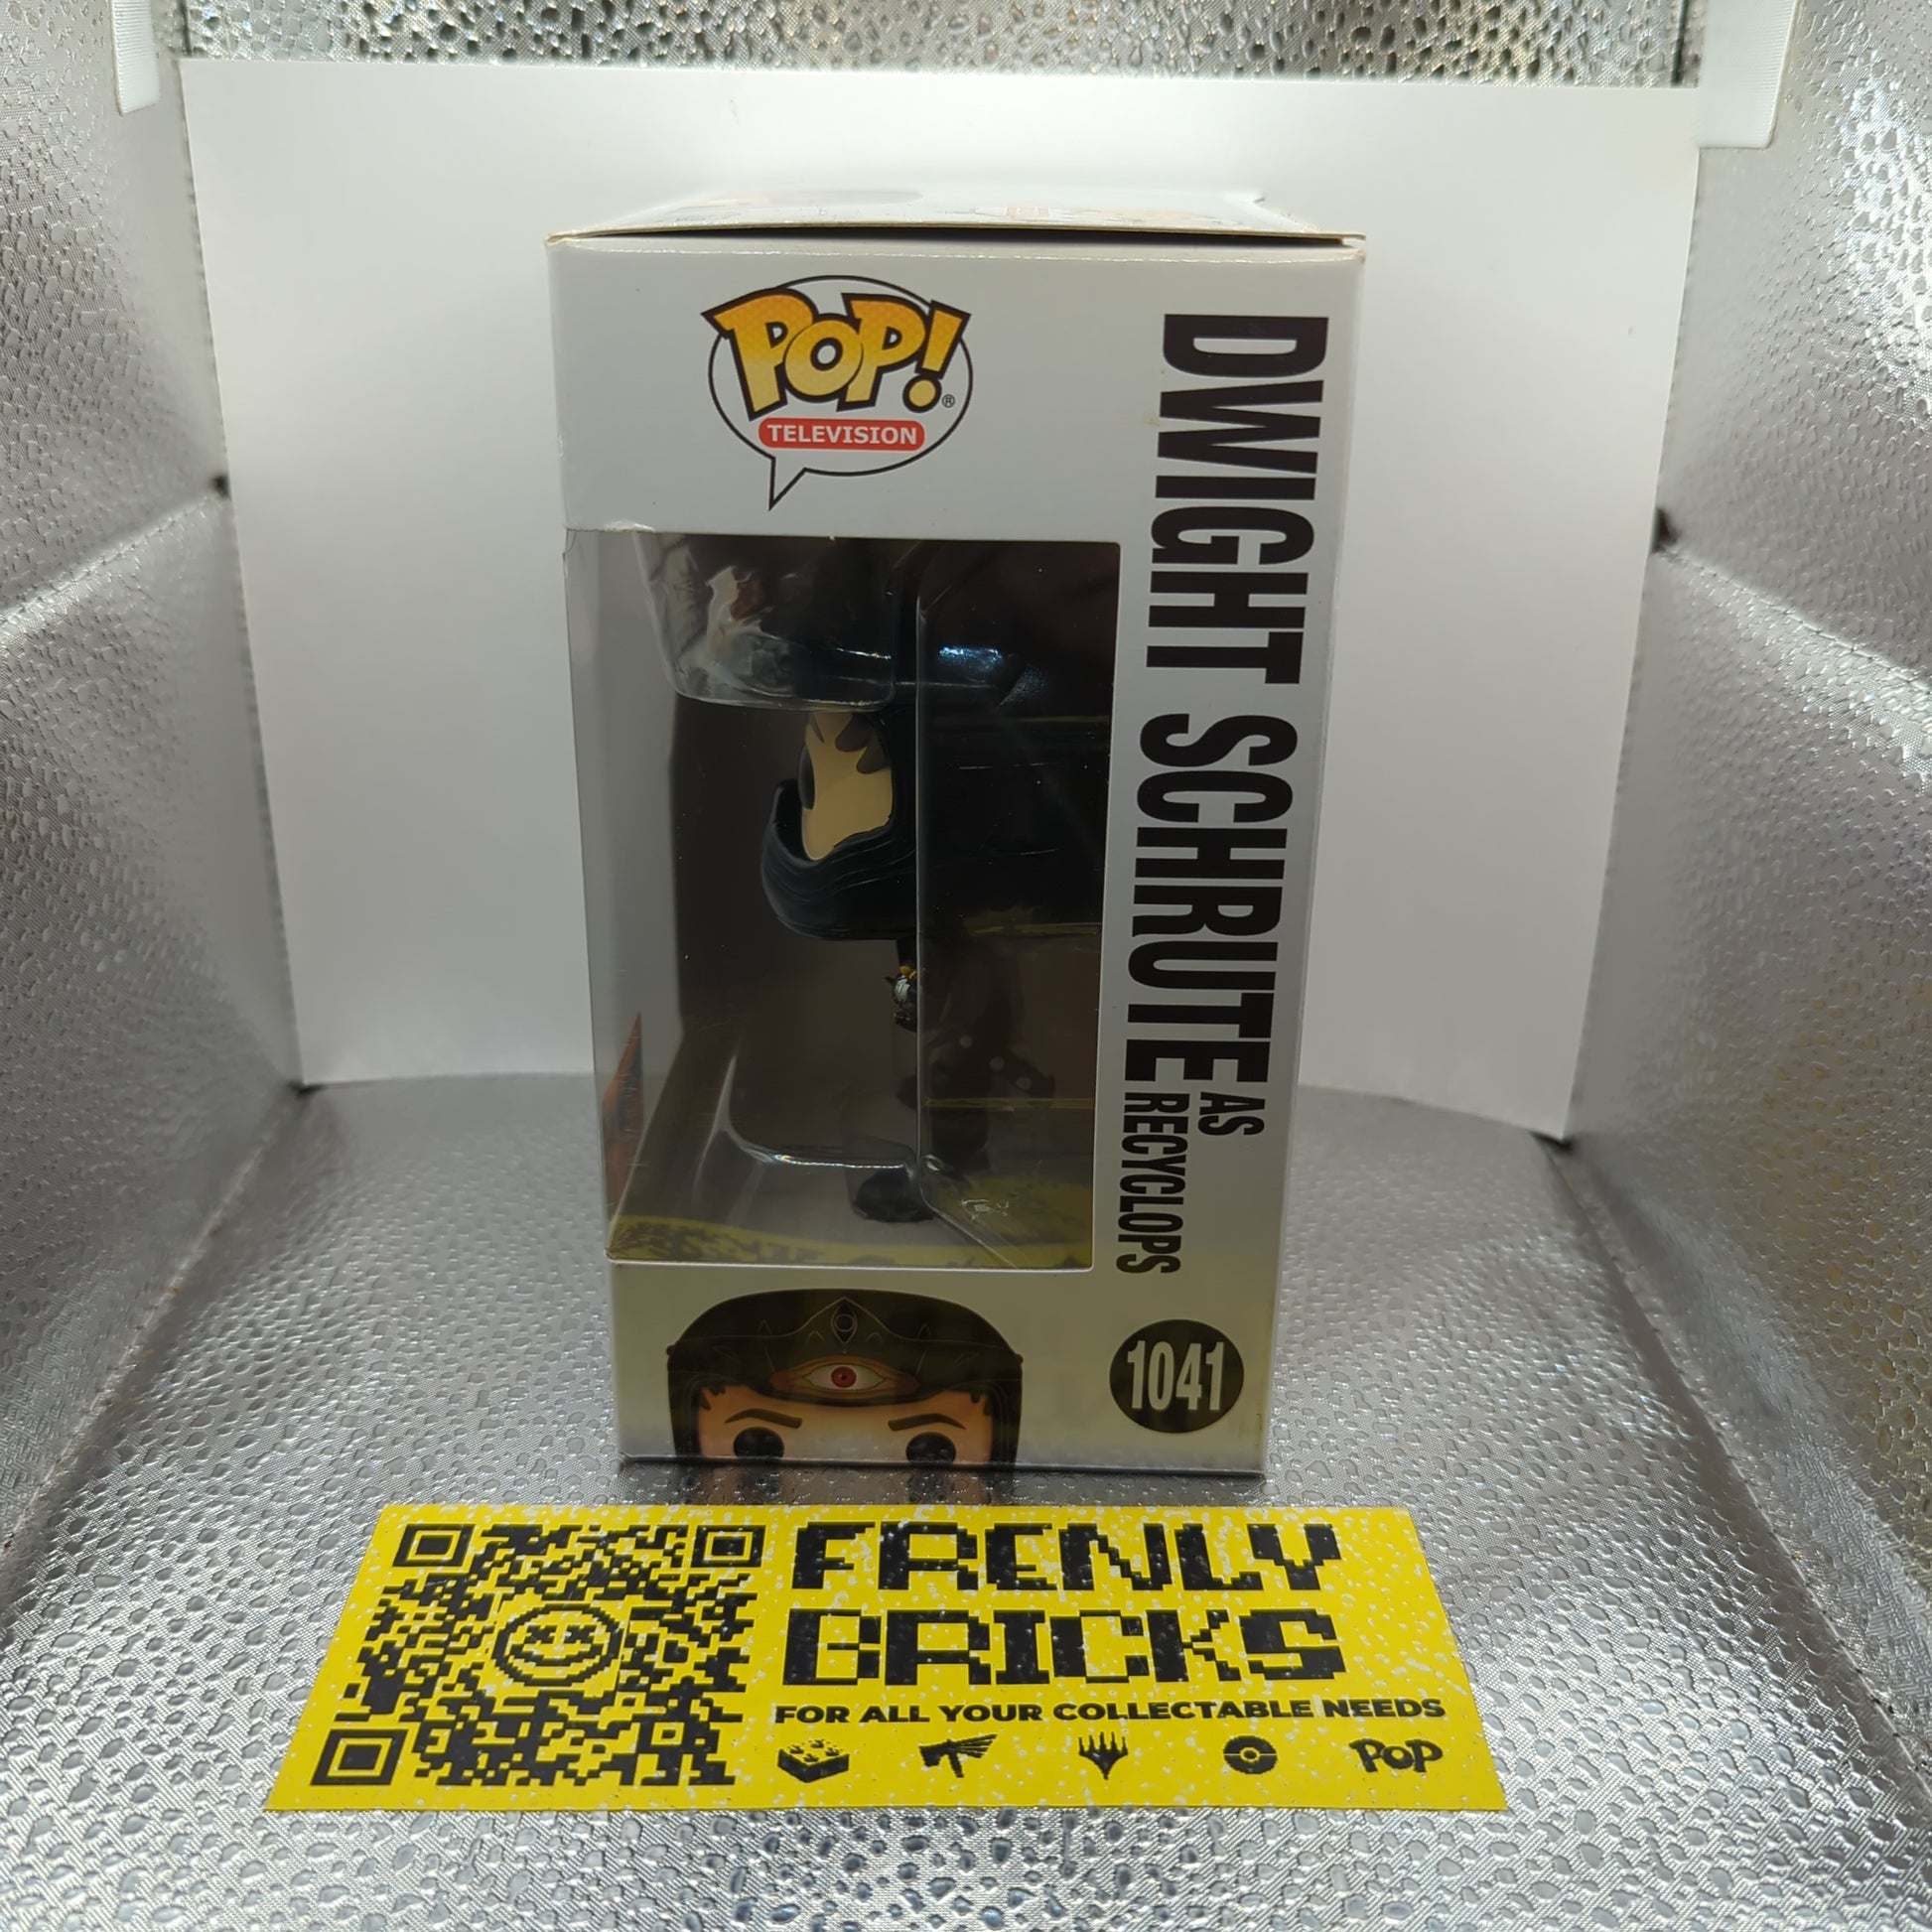 Funko Pop! Television: The Office US - Dwight Schrute As Recyclops #1041 FRENLY BRICKS - Open 7 Days